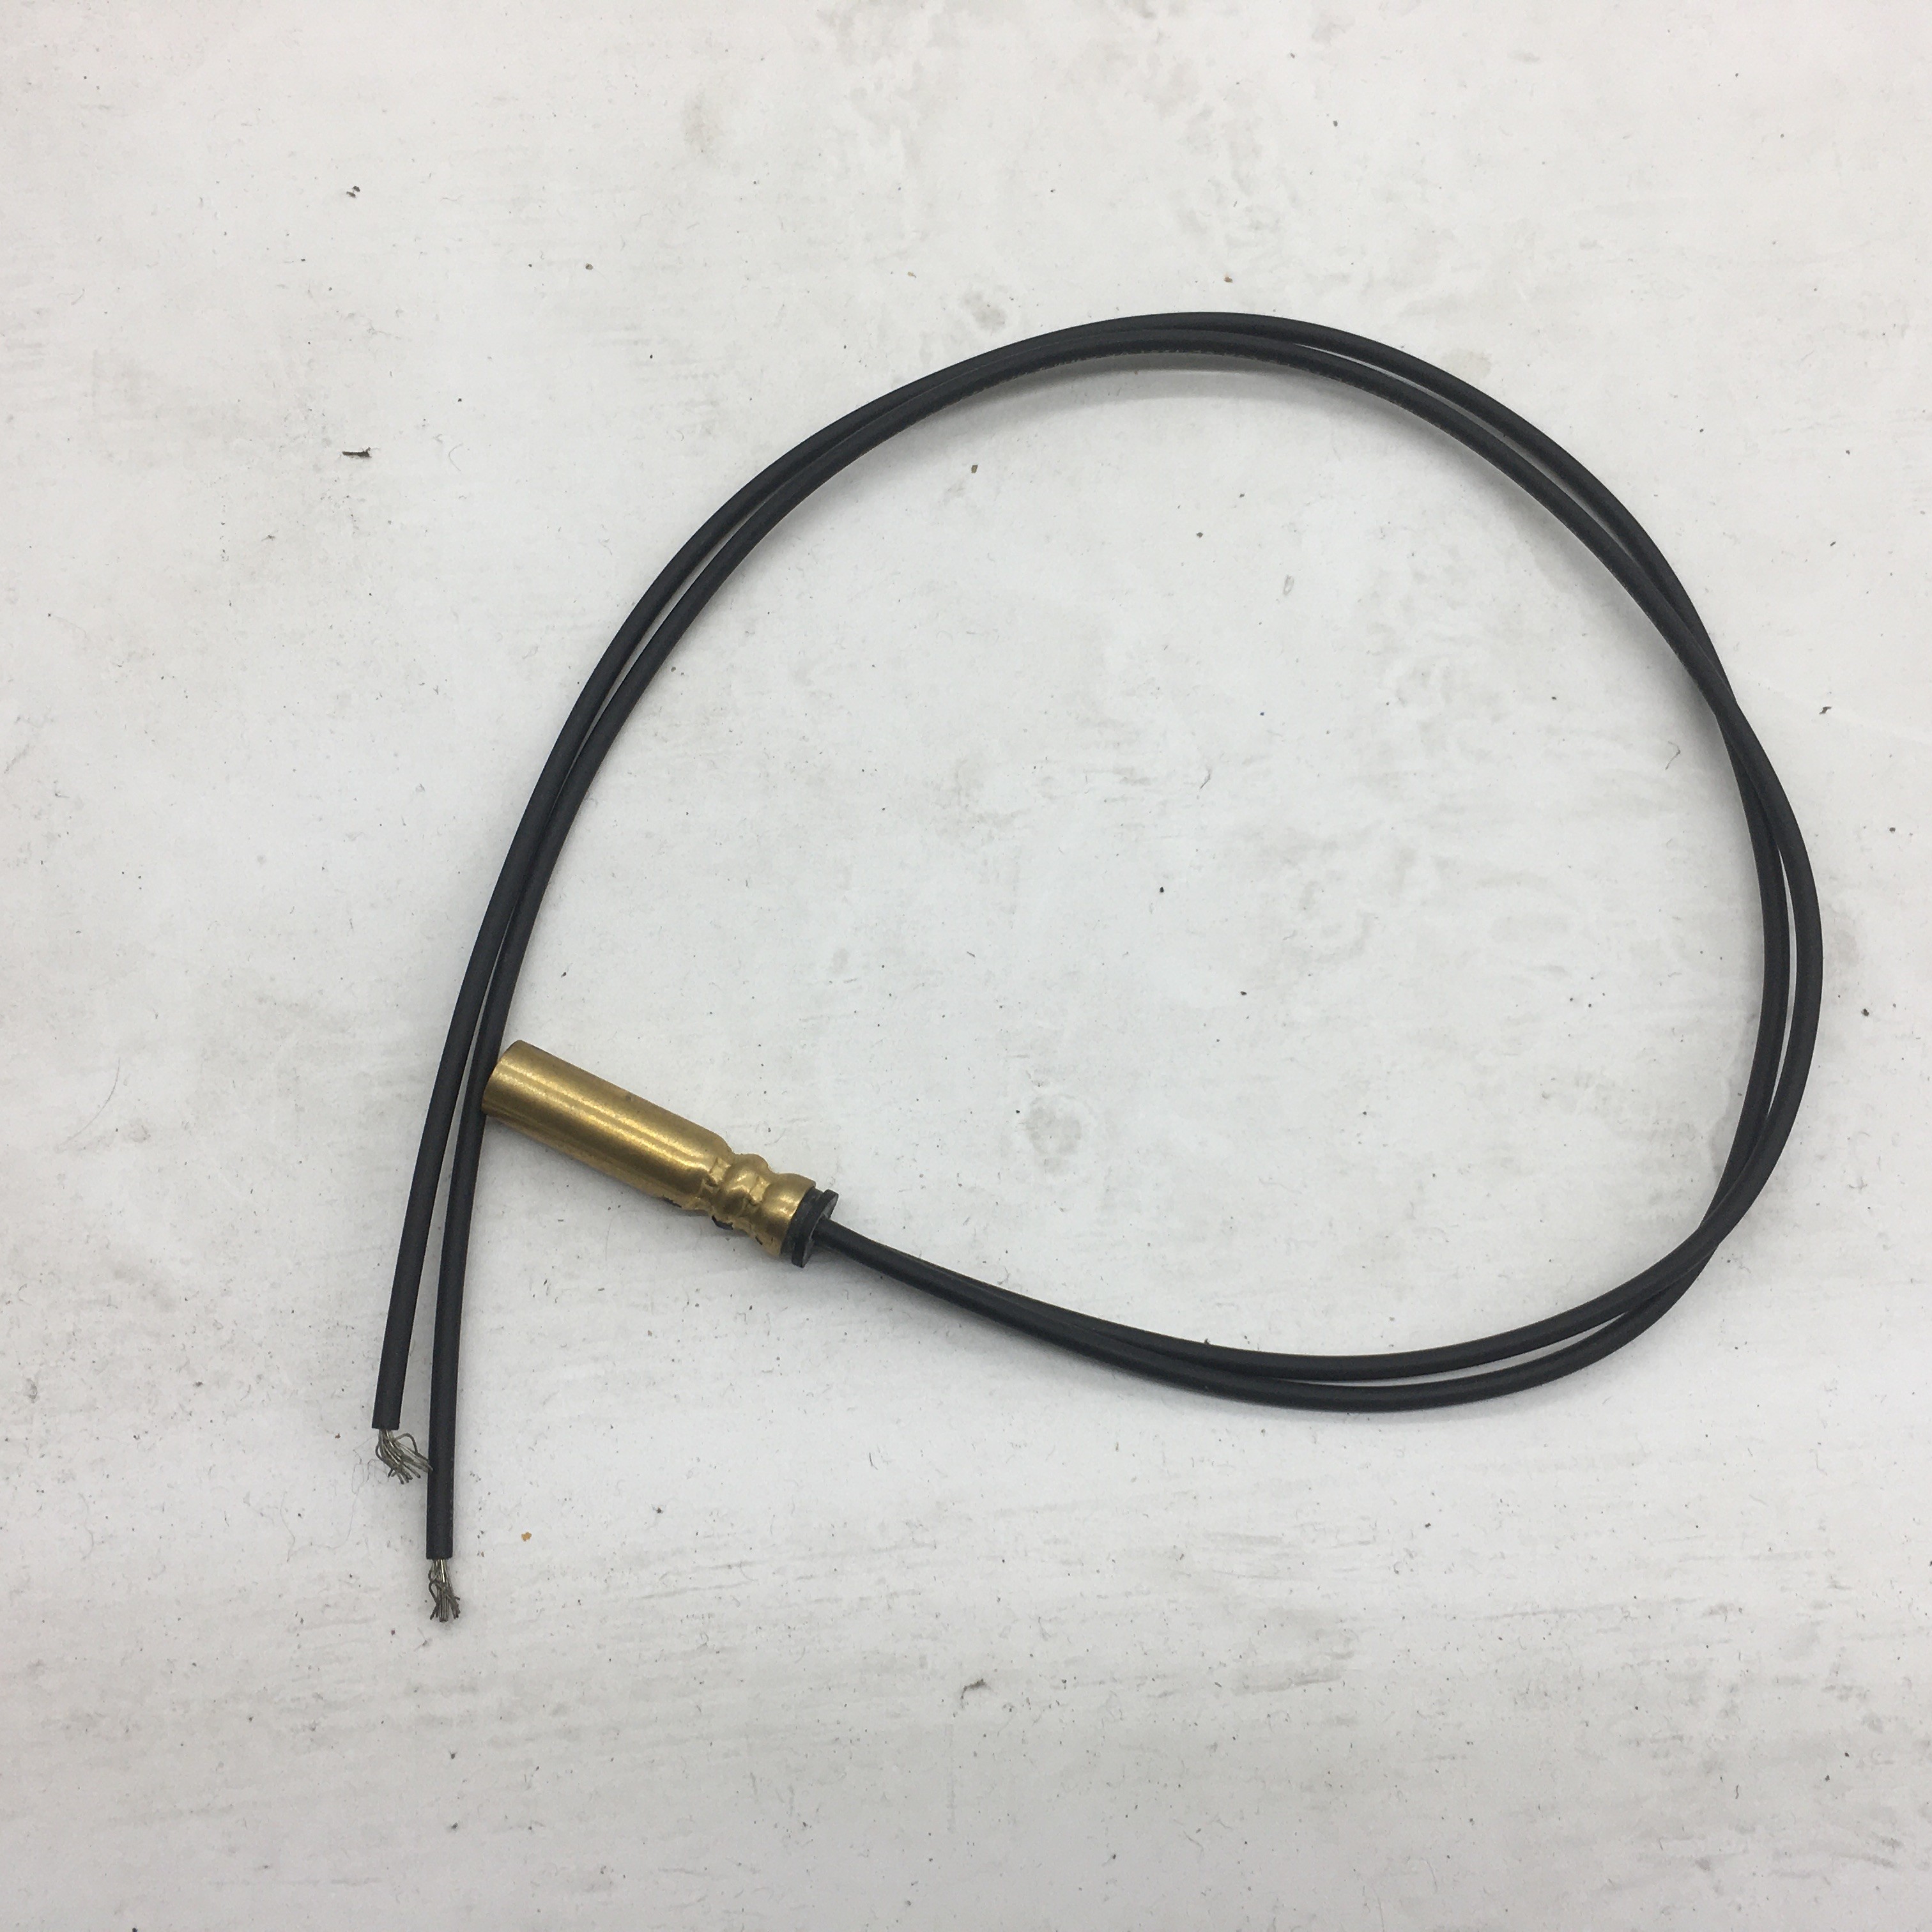 Cheap Thermo King Parts Partssensor Thermistor 10k. Trailer for sale